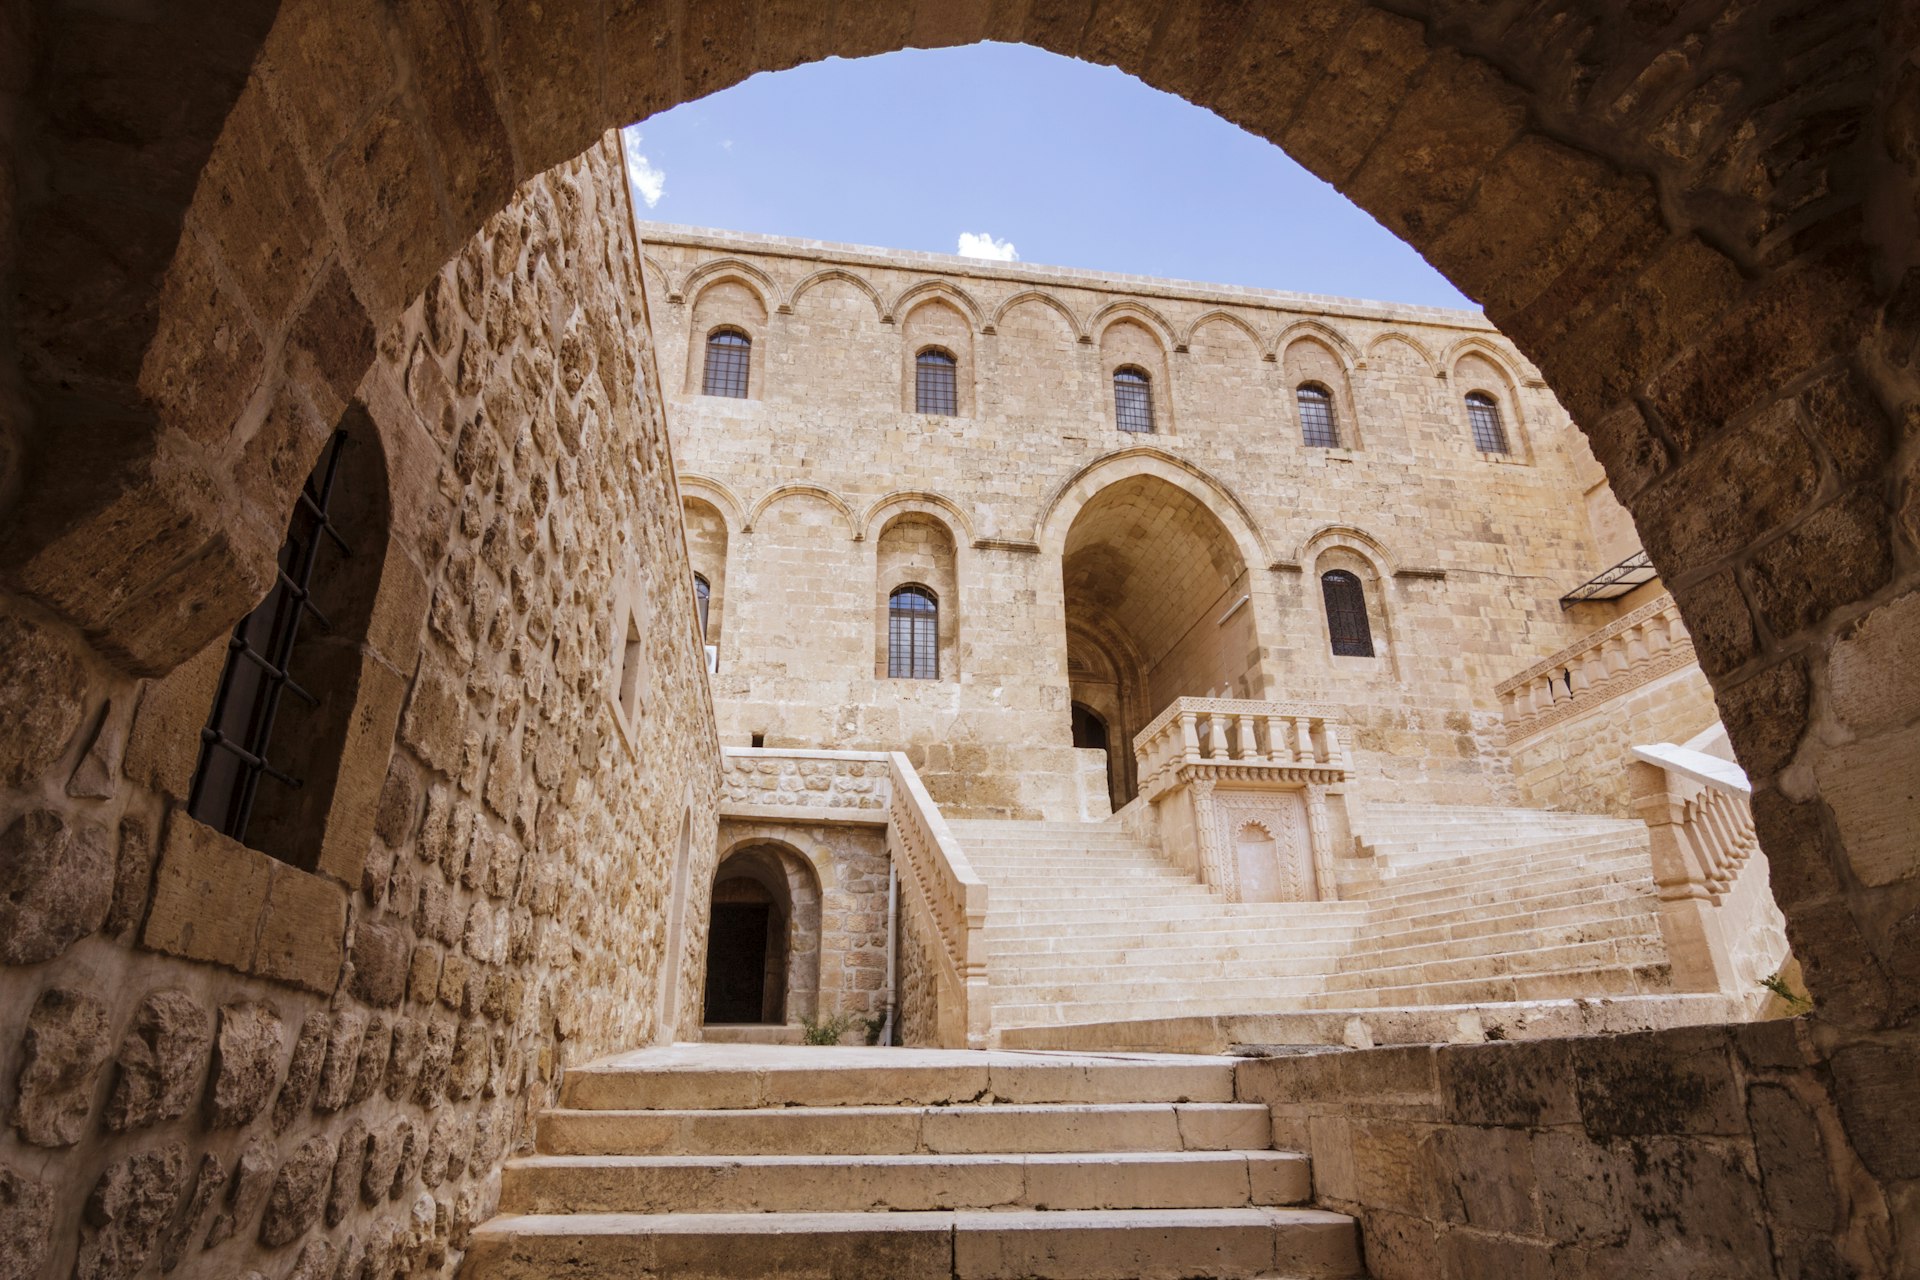 A sandstone-colored monastery building viewed through an archway